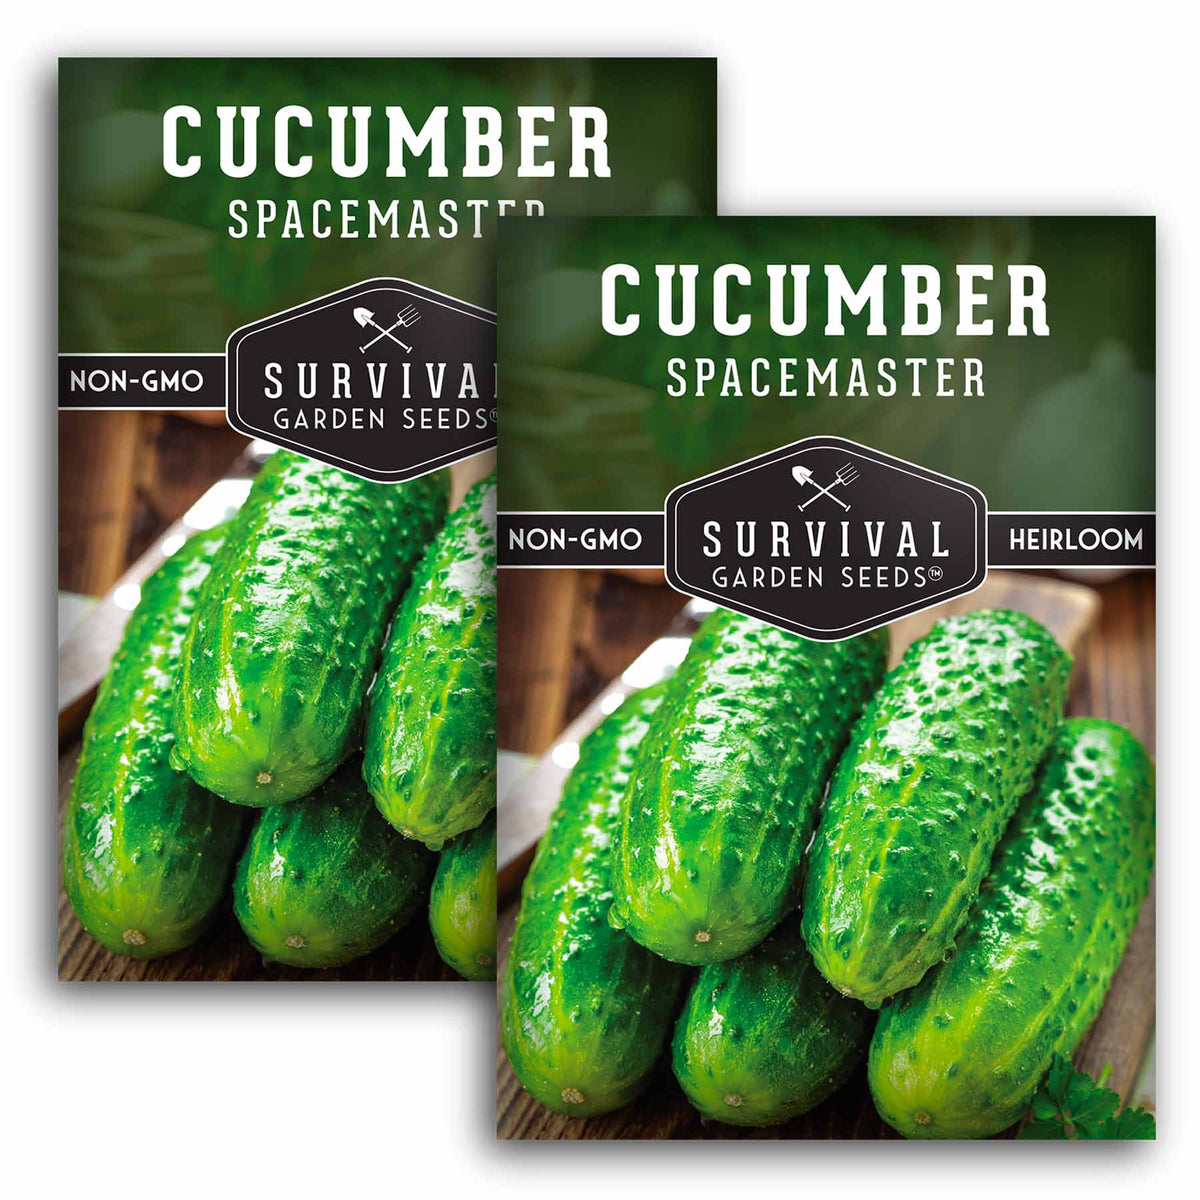 2 packets of Spacemaster Cucumber seeds